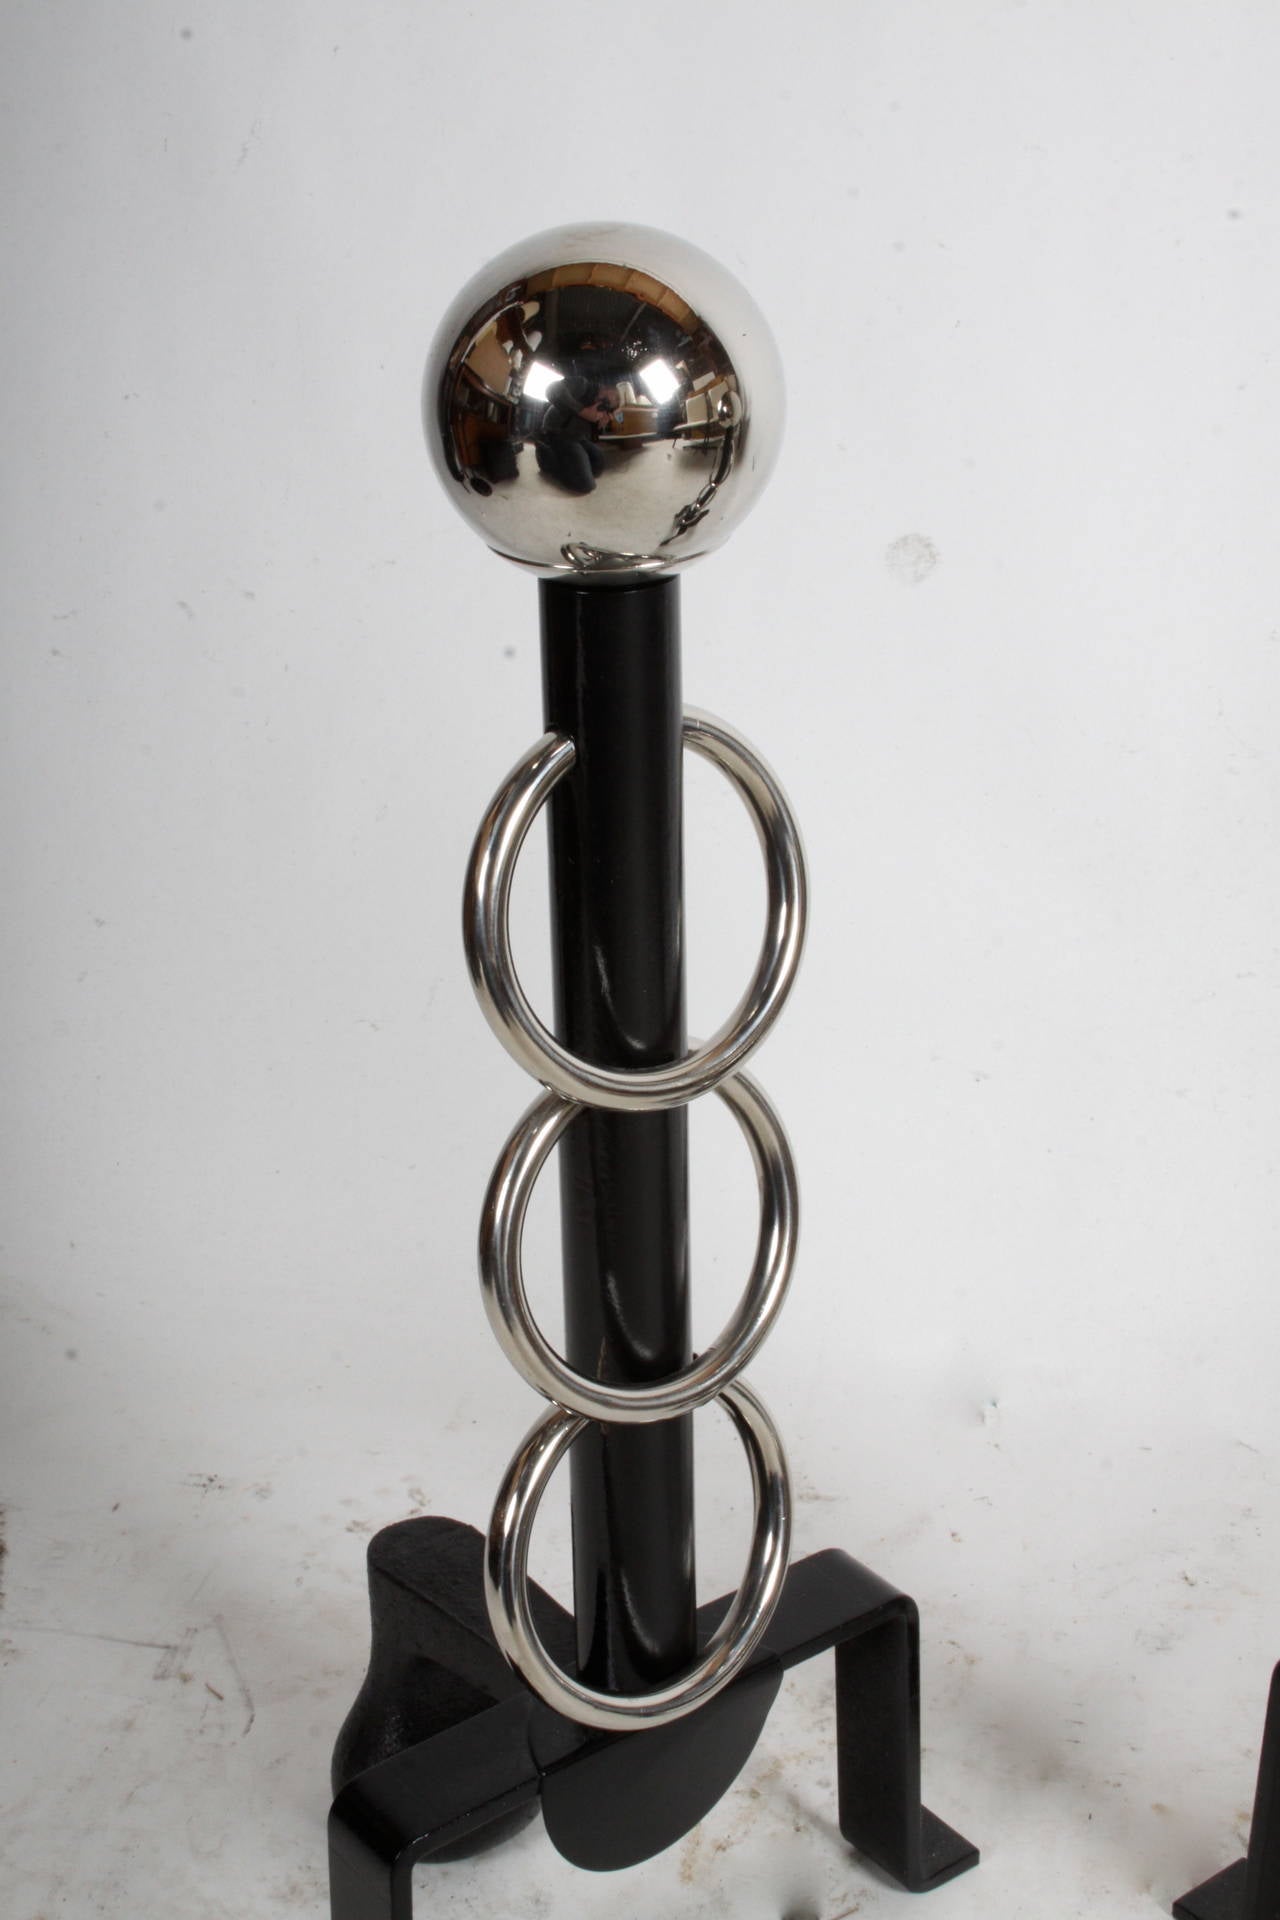 Pair of Midcentury sculptural iron and nickel andirons. Nickel ball finial with nickel ring accents.